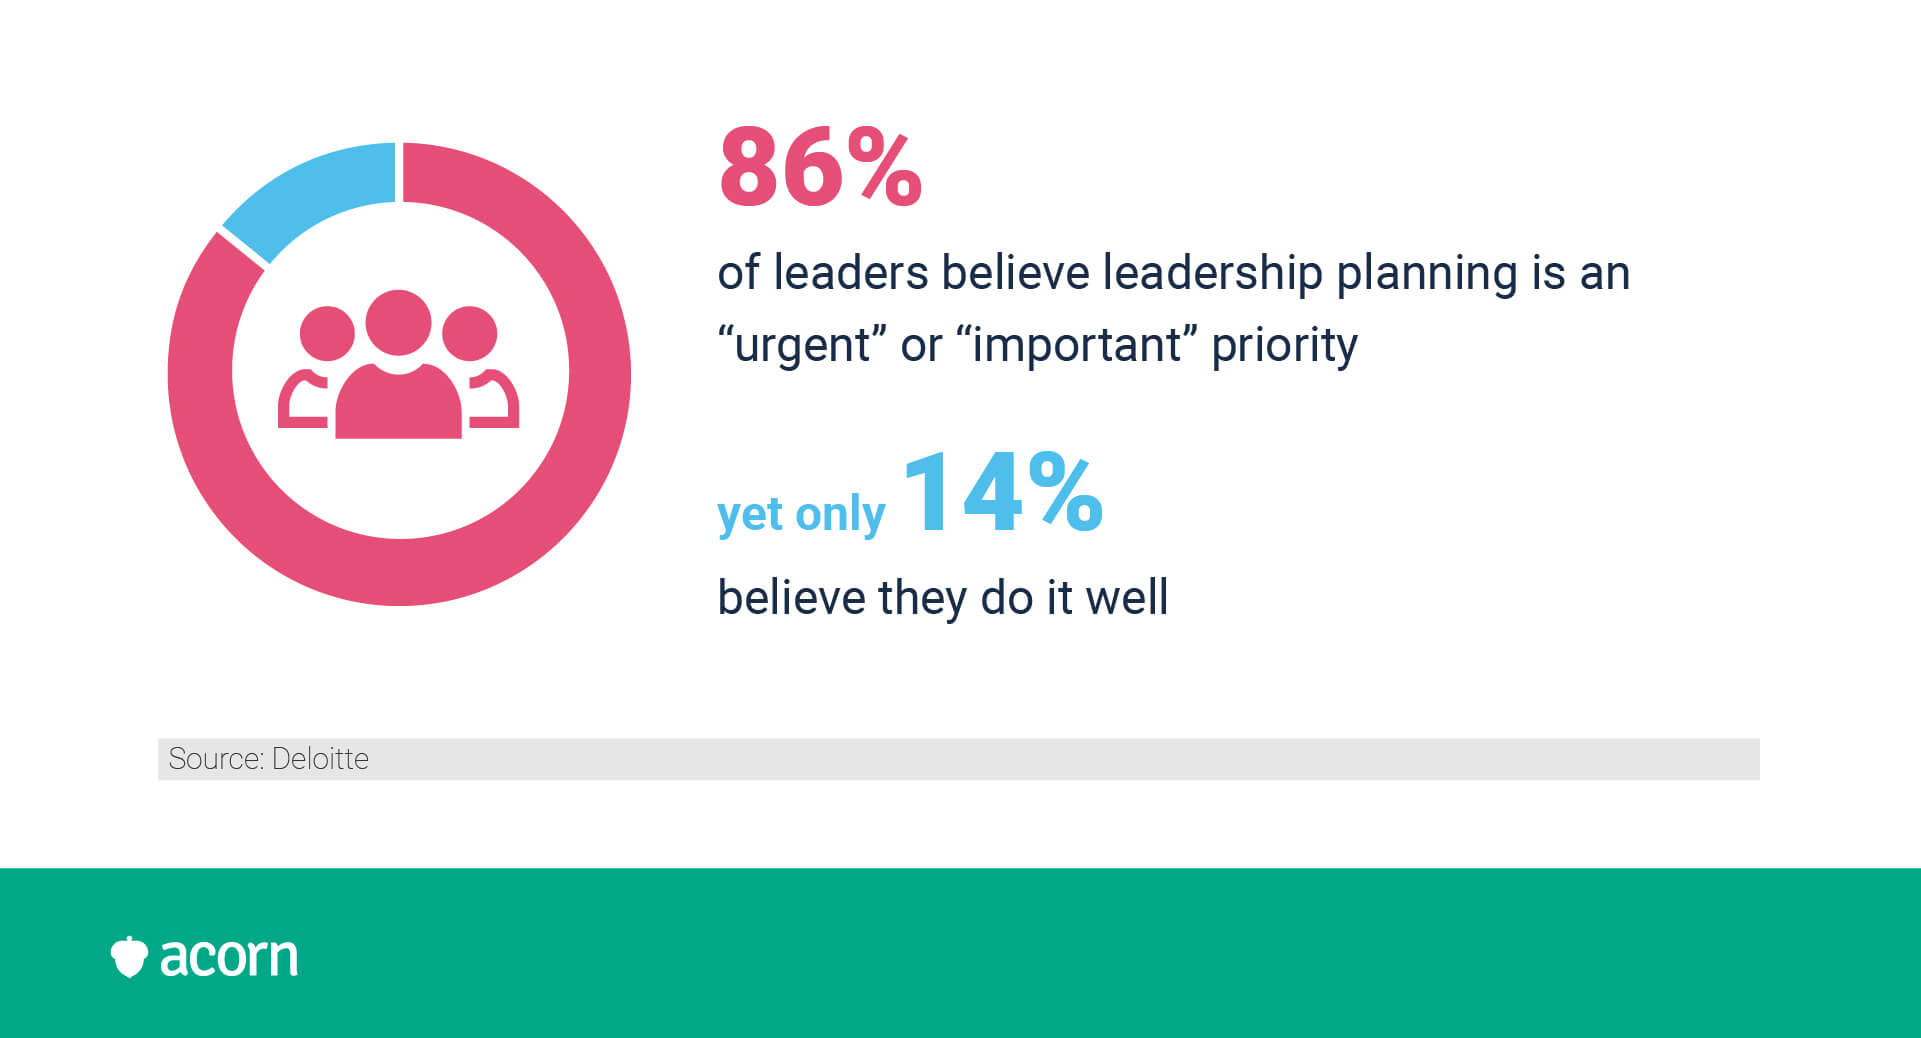 only 14% of organisations make leadership planning a priority though 86% consider it urgent